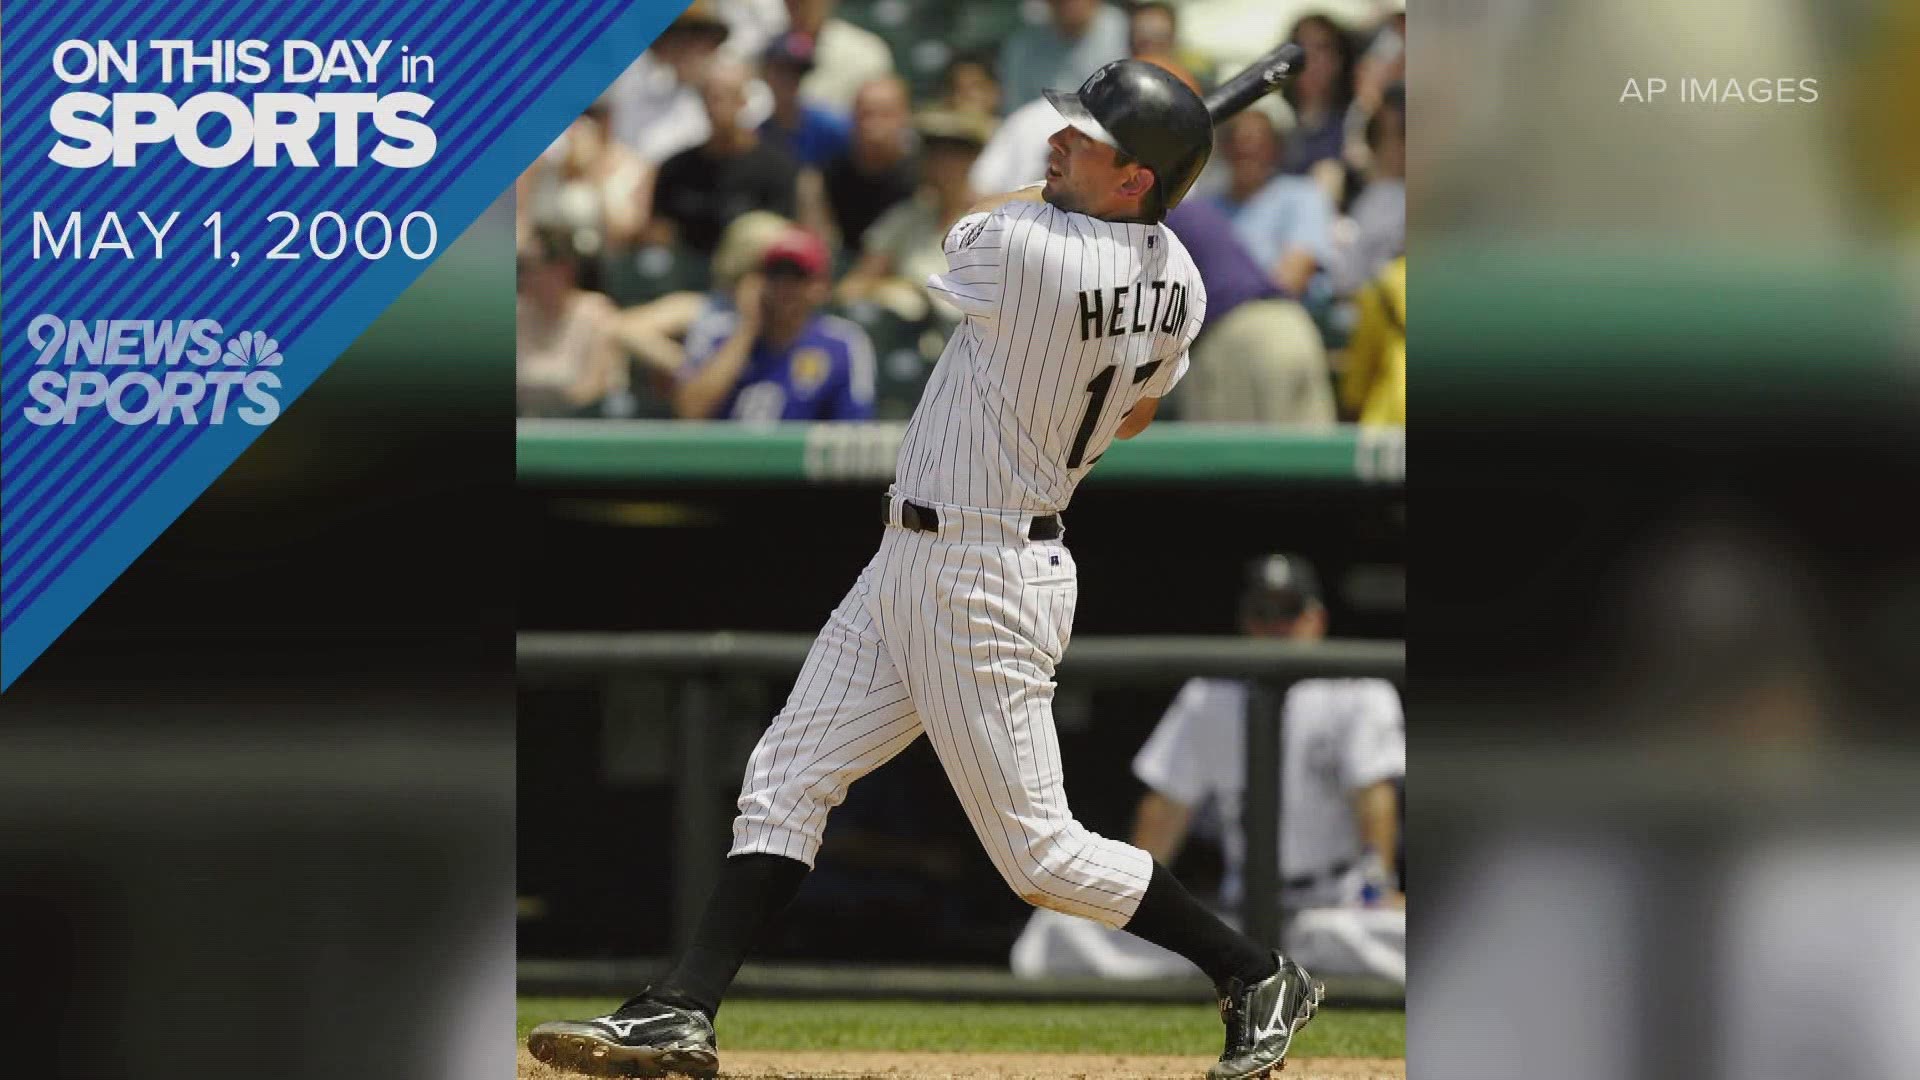 On May 1, 2000 Colorado Rockies infielder Todd Helton homered three times against the Montreal Expos at Coors Field.